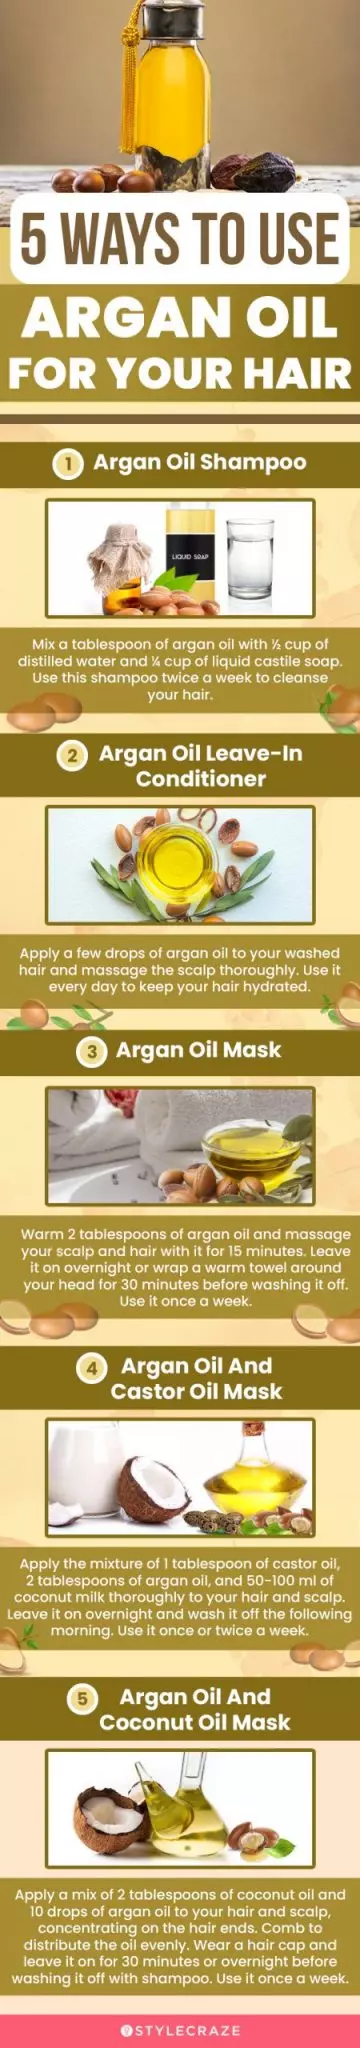 5 ways to use argan oil for hair (infographic)